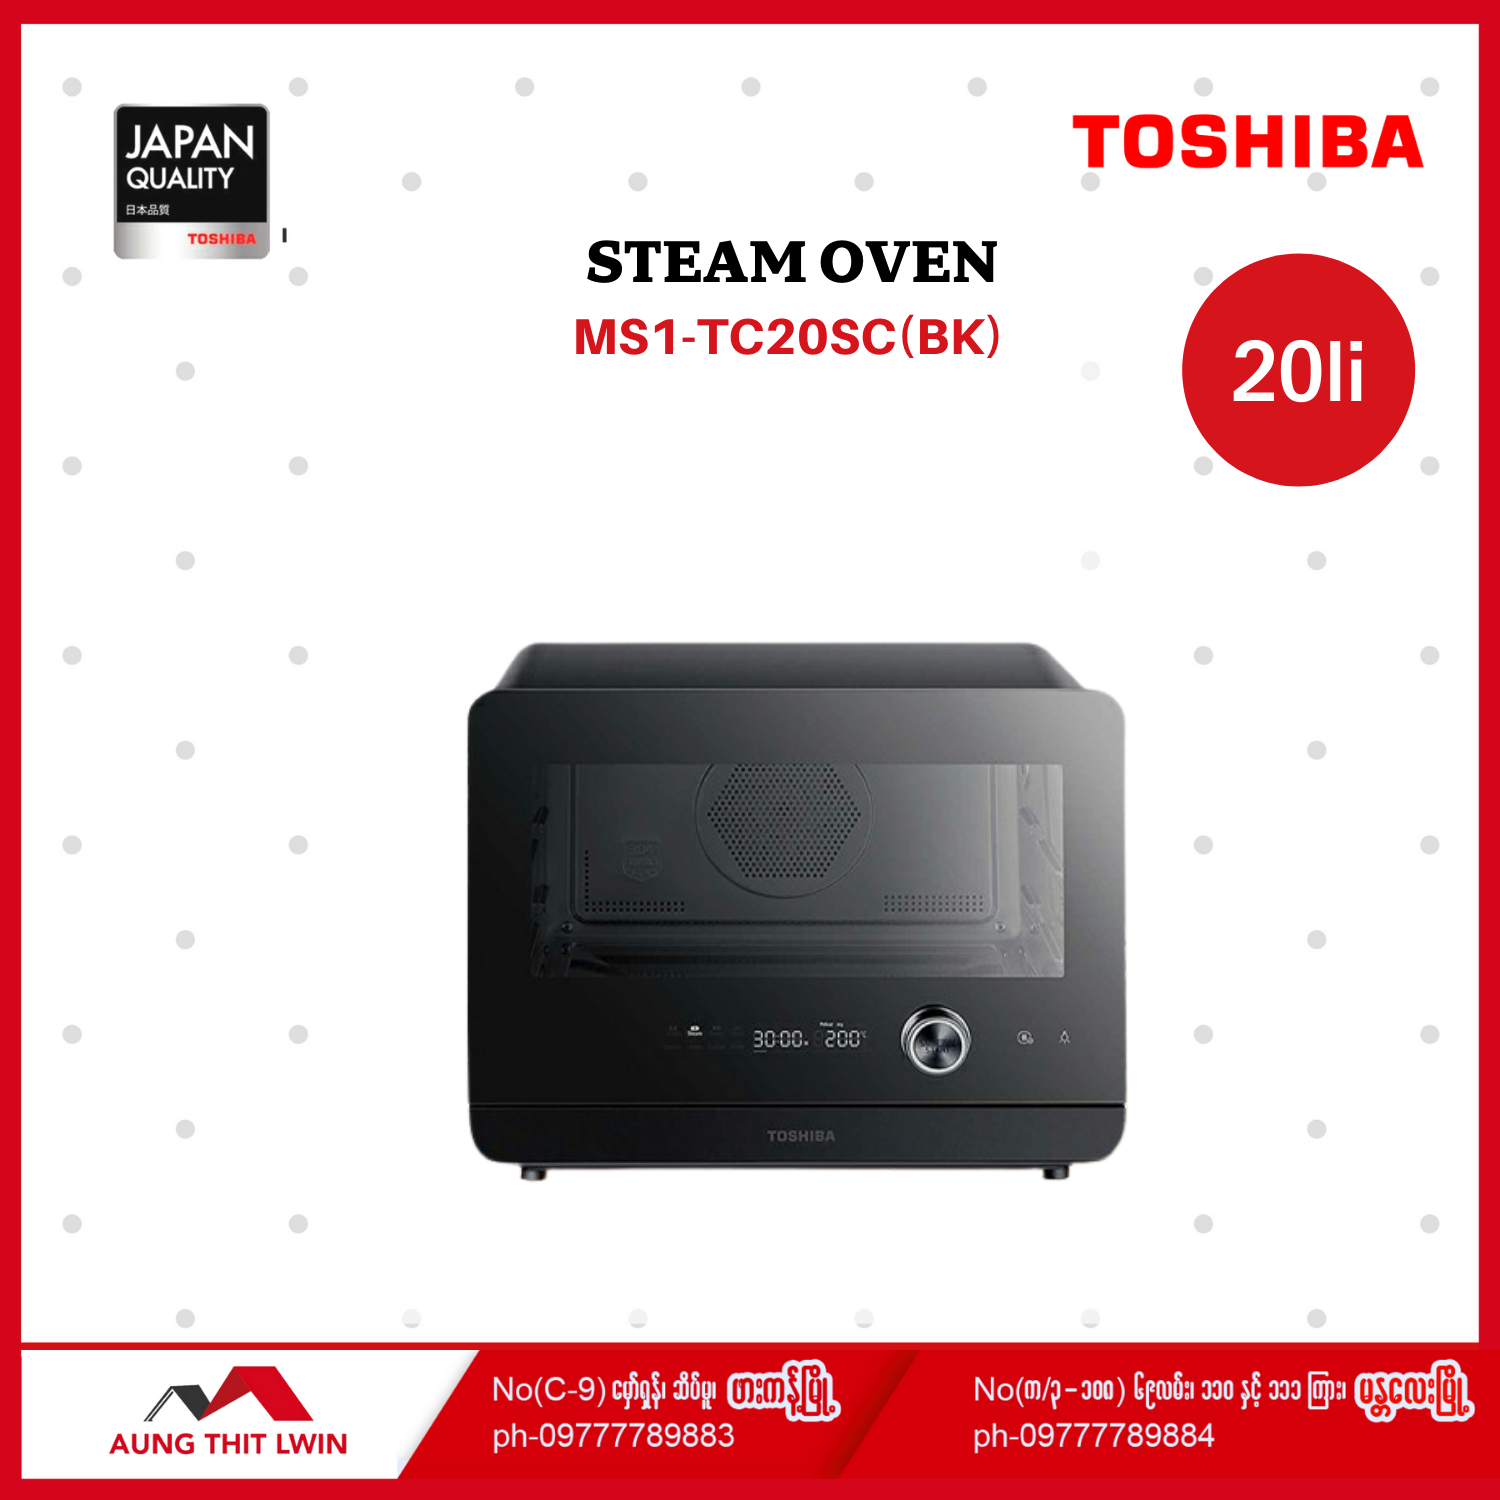 Toshiba Steam Oven MS1-TC20Sc(BK) - Aung Thit Lwin